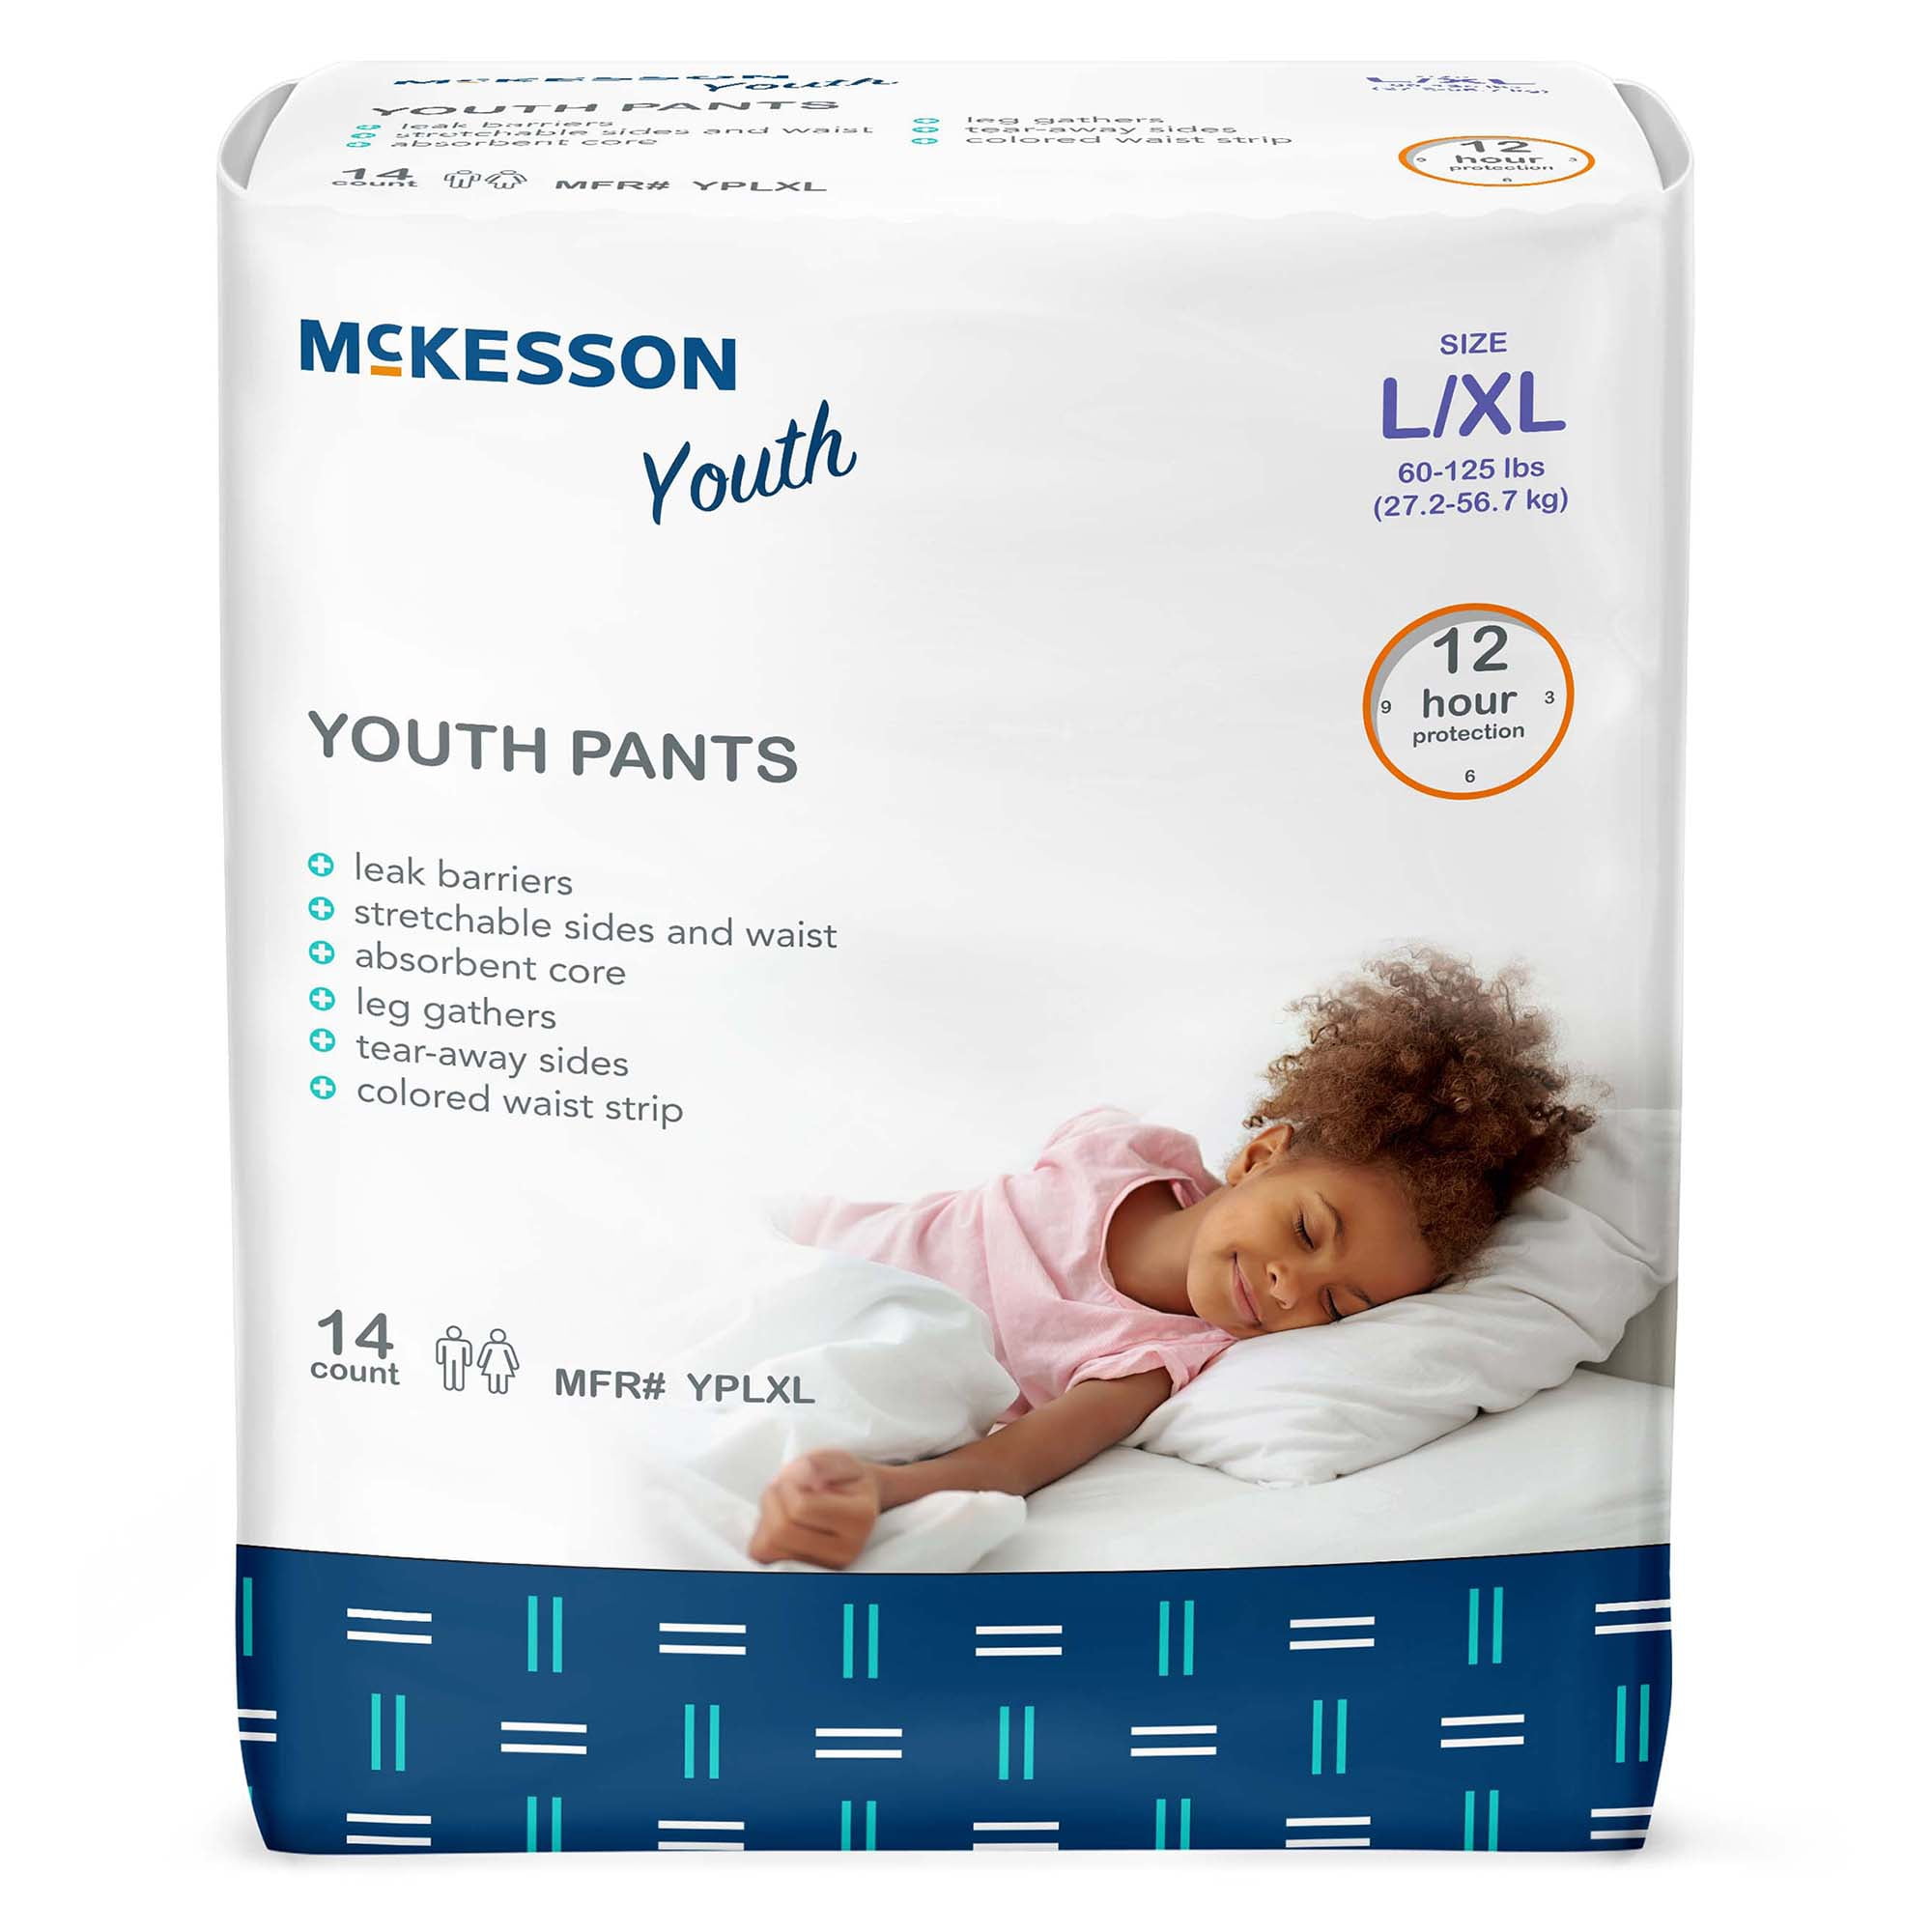 Mckesson Youth Pants, Overnight Pull Up Pants - Size L/xl, 60-120